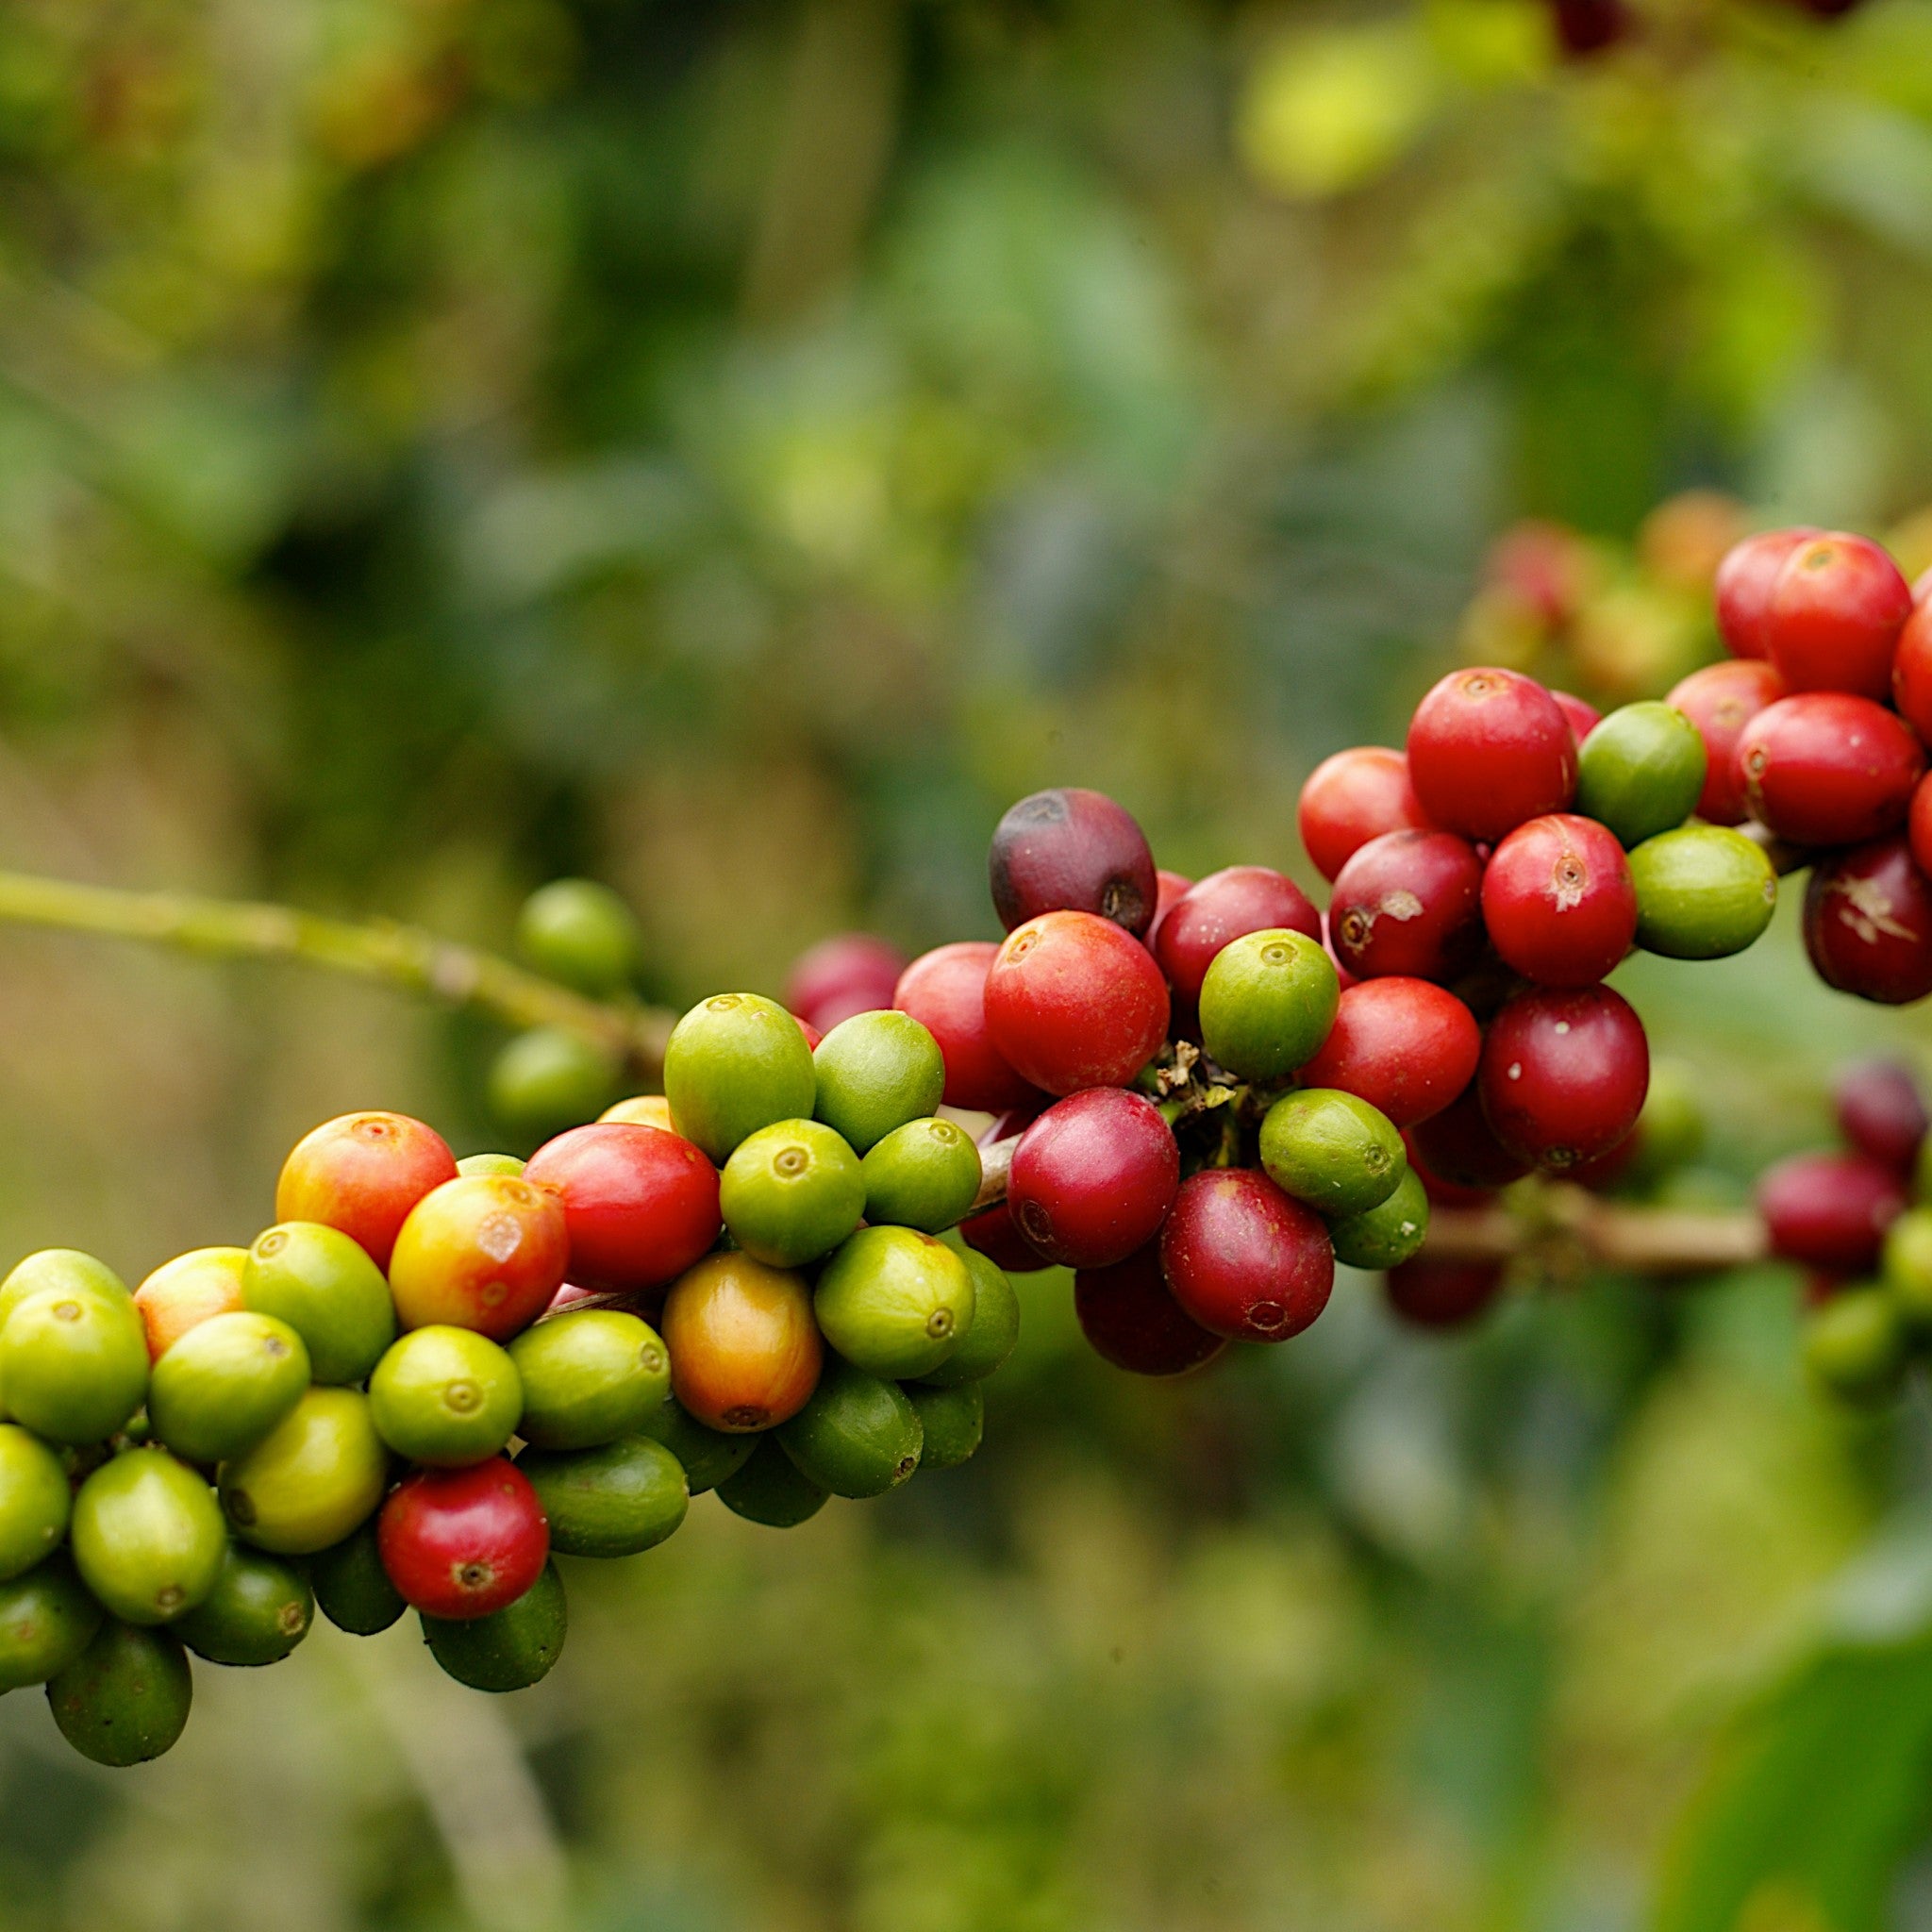 Close up image showing ripe speciality coffee cherries on a branch